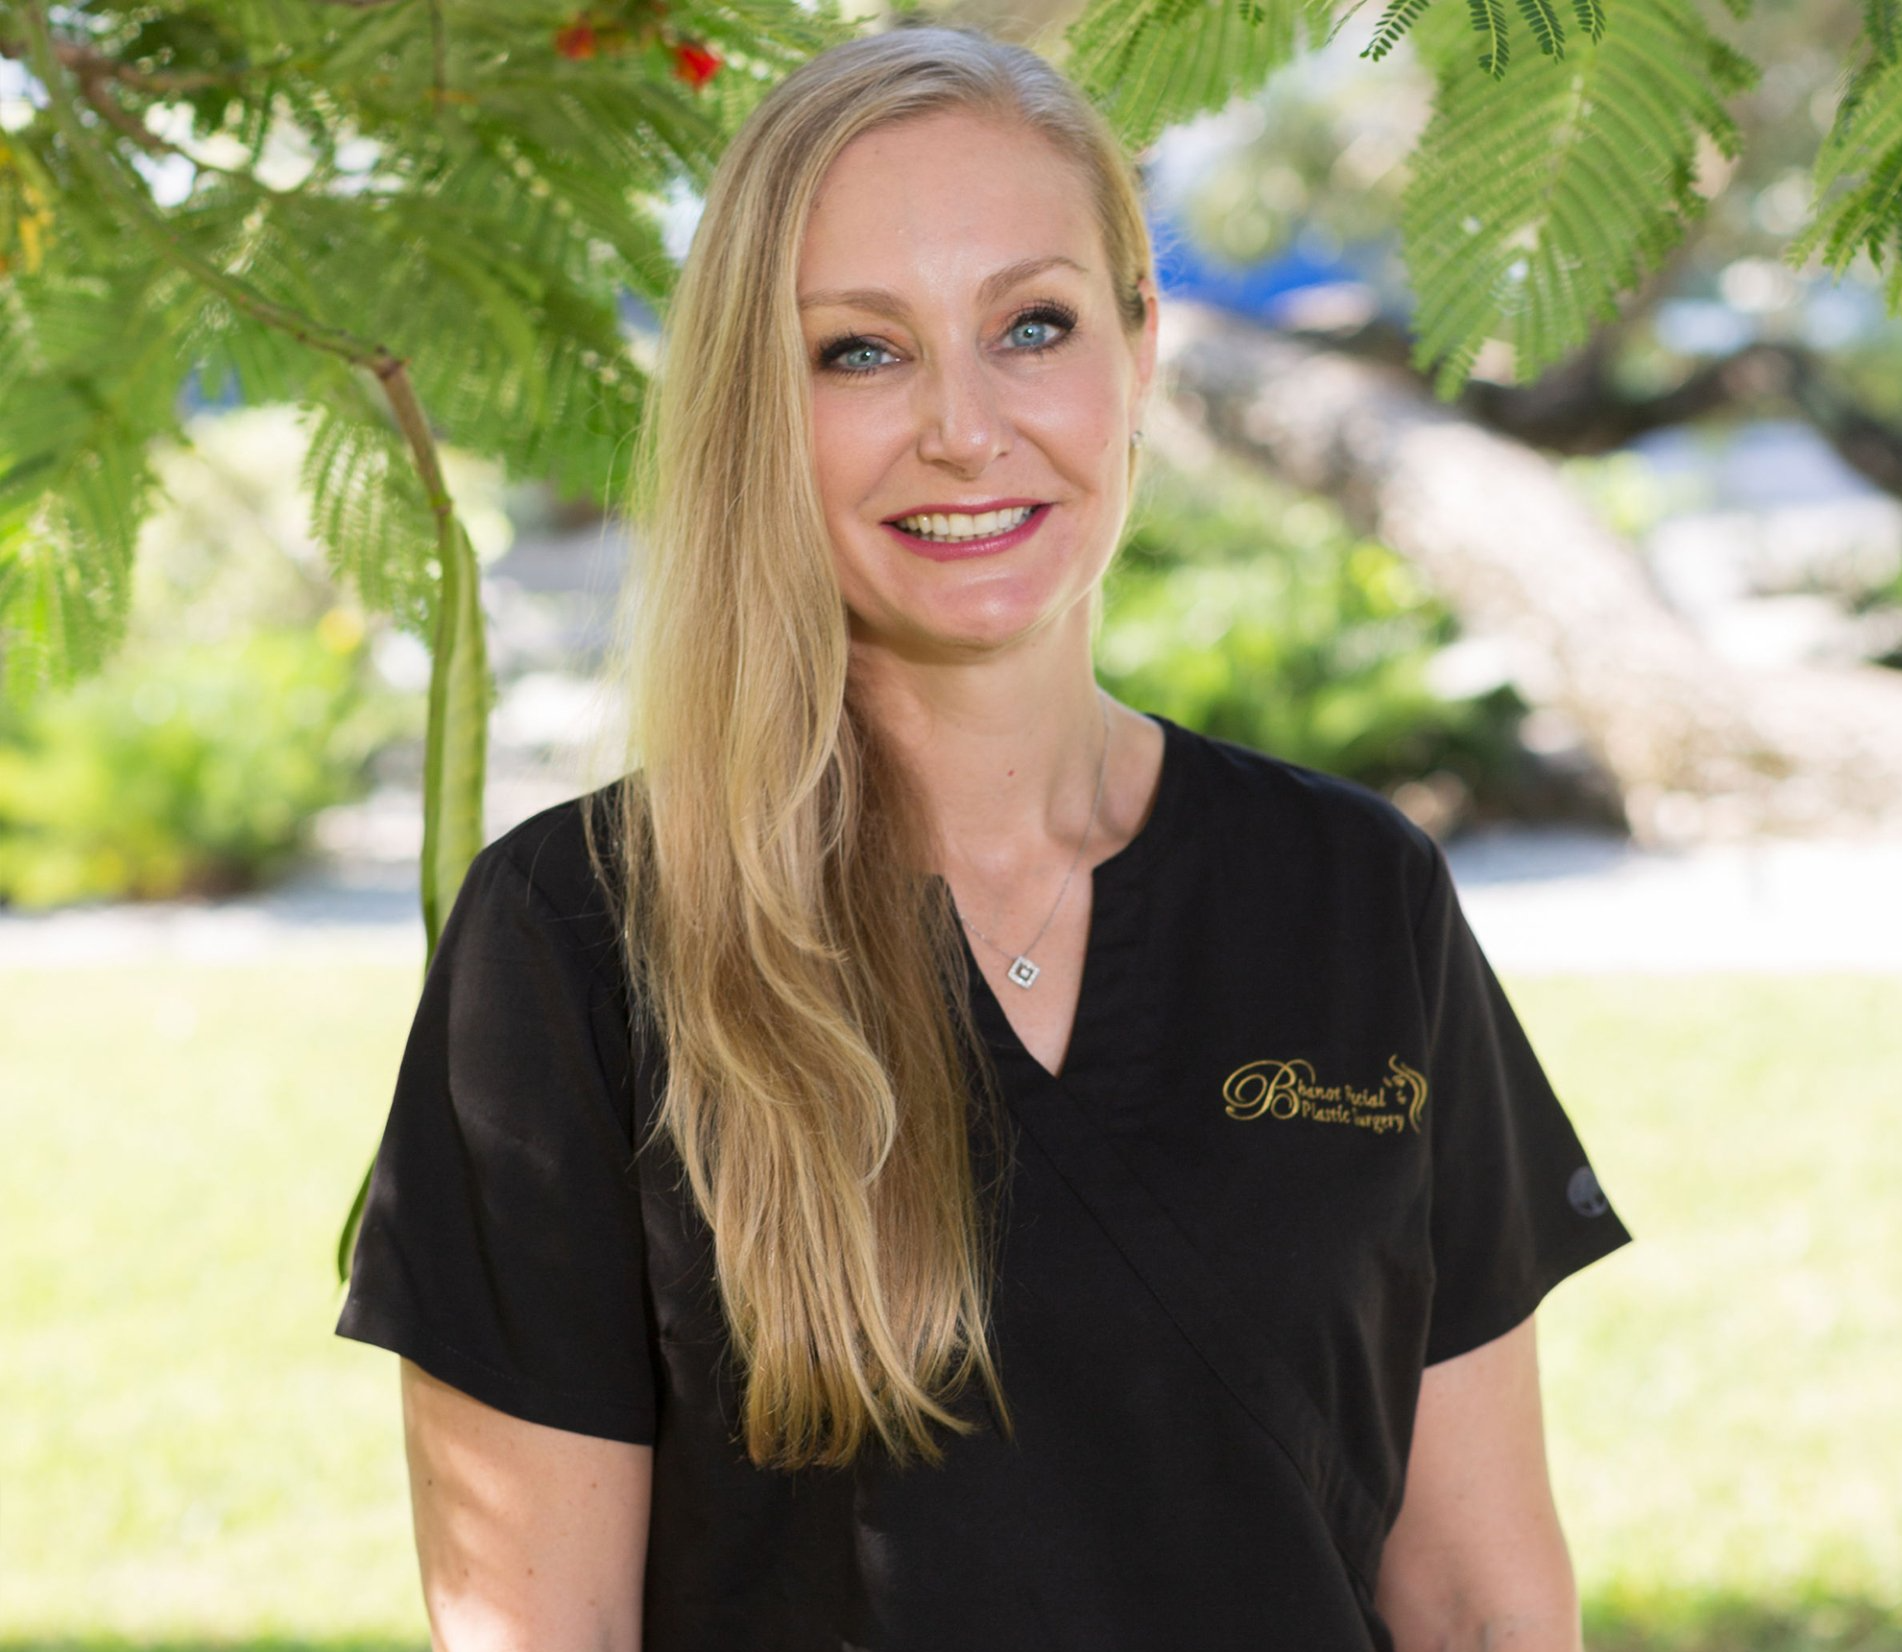 Kelly, PA-C, has been the Office Manager at Bhanot Facial Plastic Surgery Center